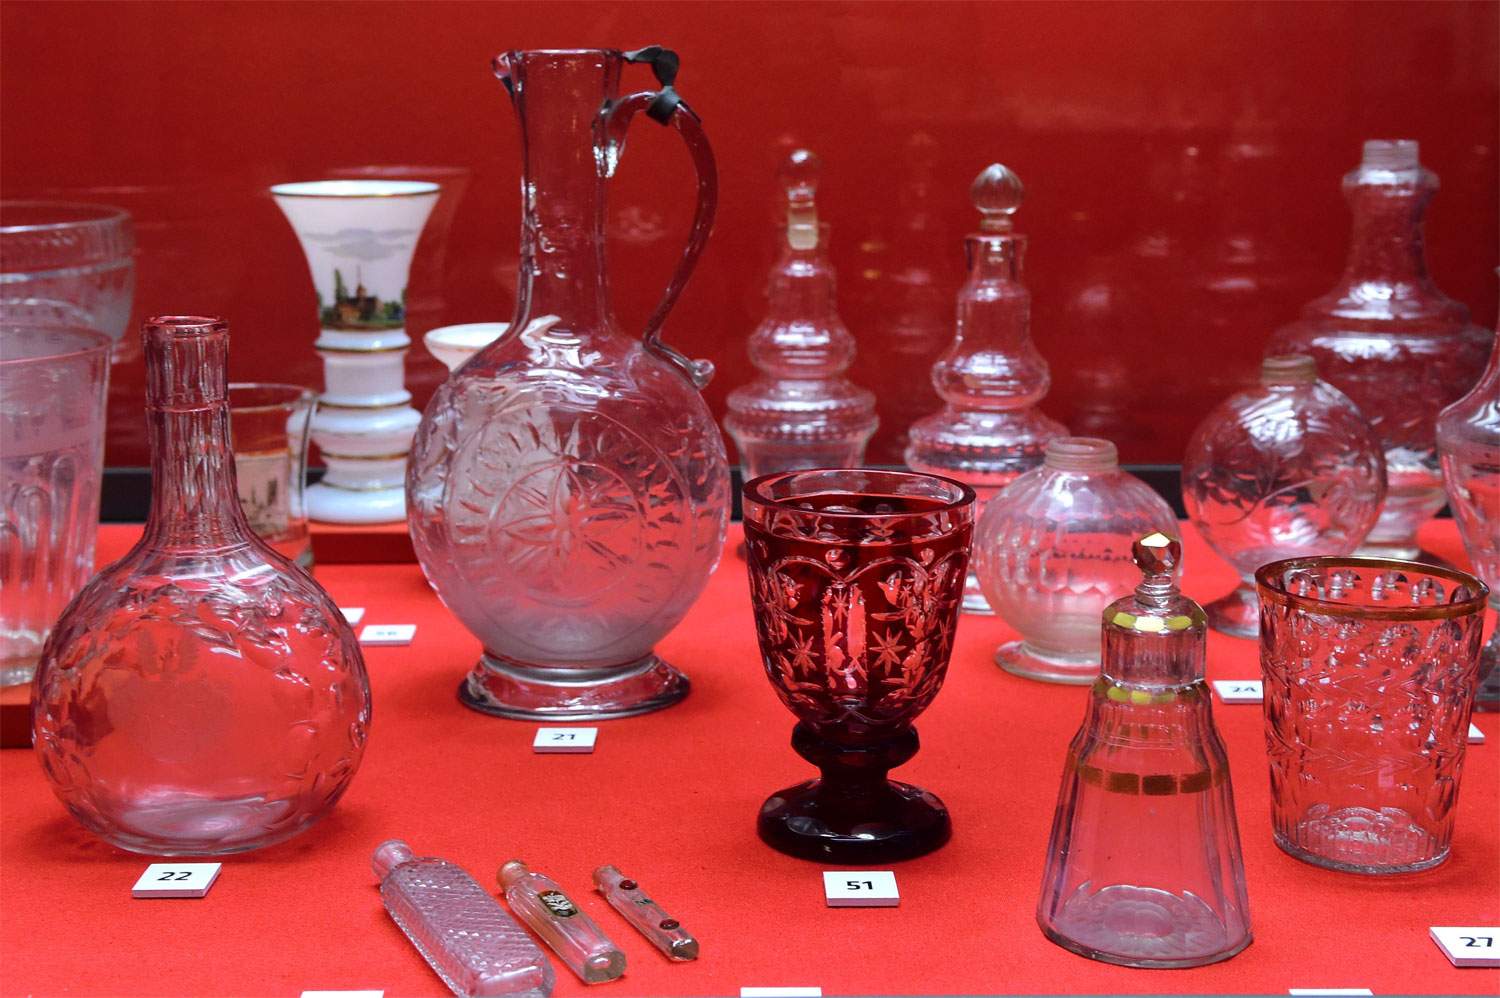 The Bologna Civic Museums acquire an important collection of glass from the seventeenth to the nineteenth century